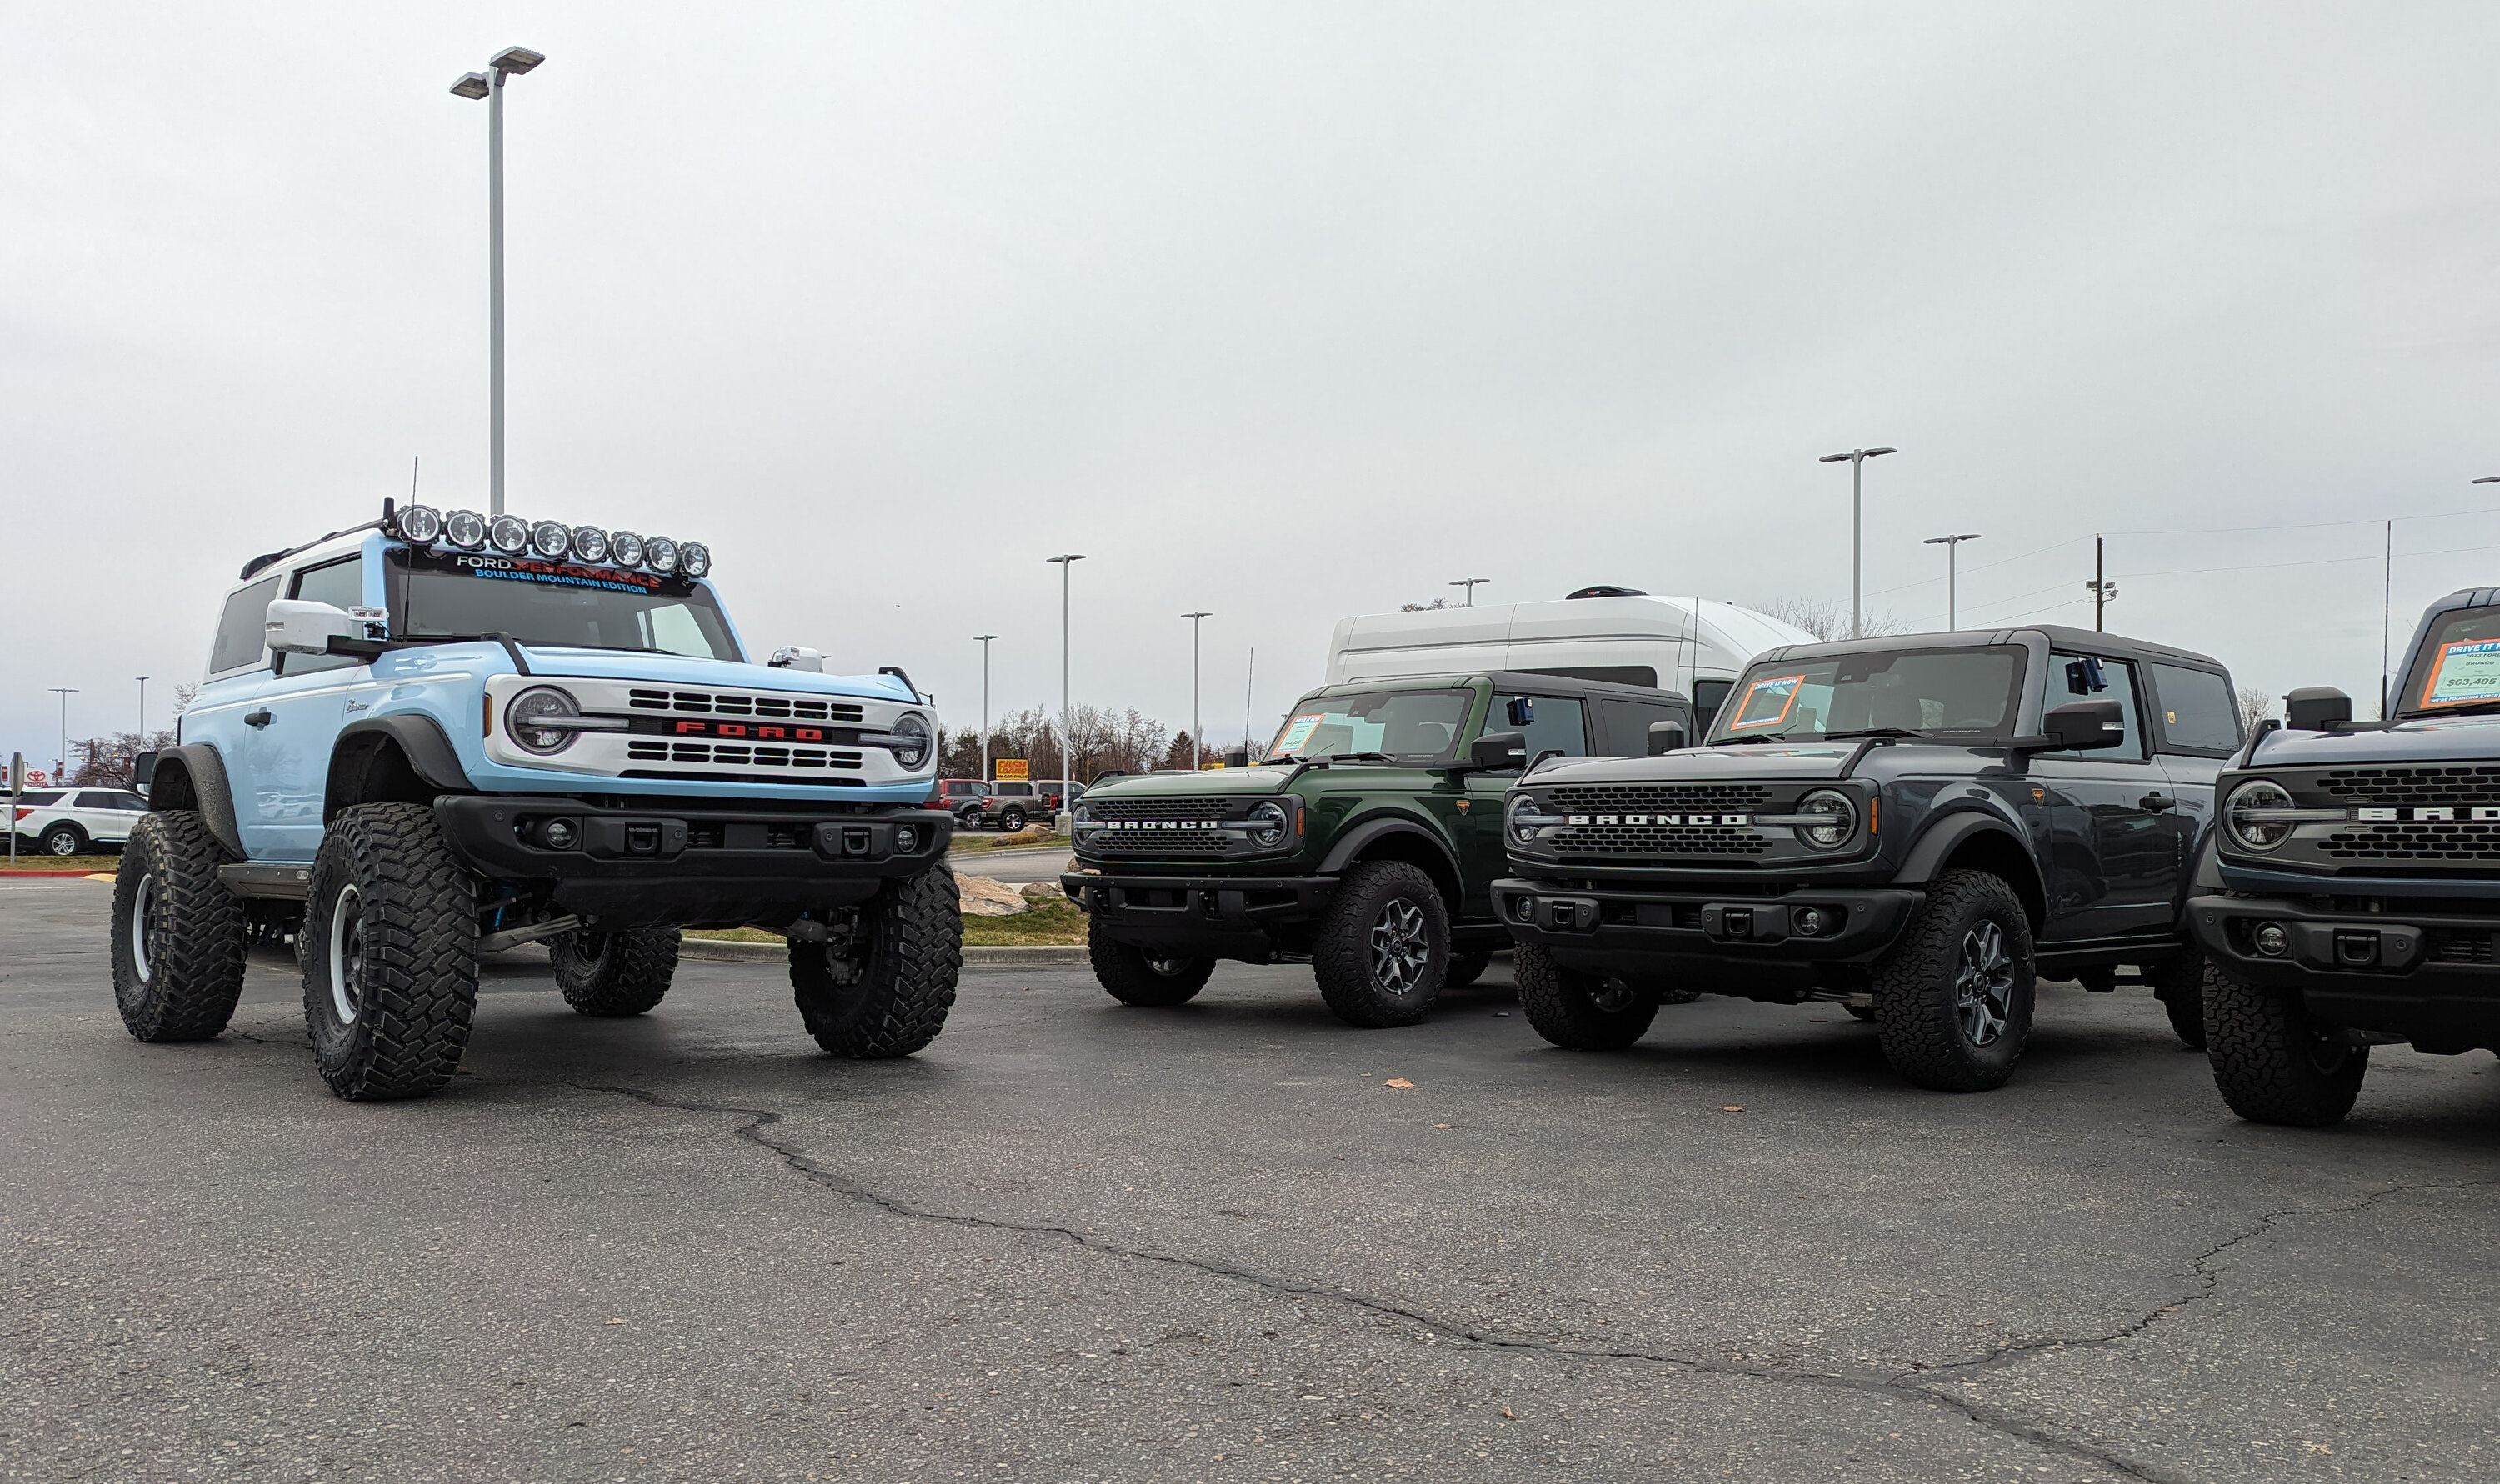 Ford Bronco The new Boulder Mountain Edition Build .... (prototype) Bronco next to broncos on lot